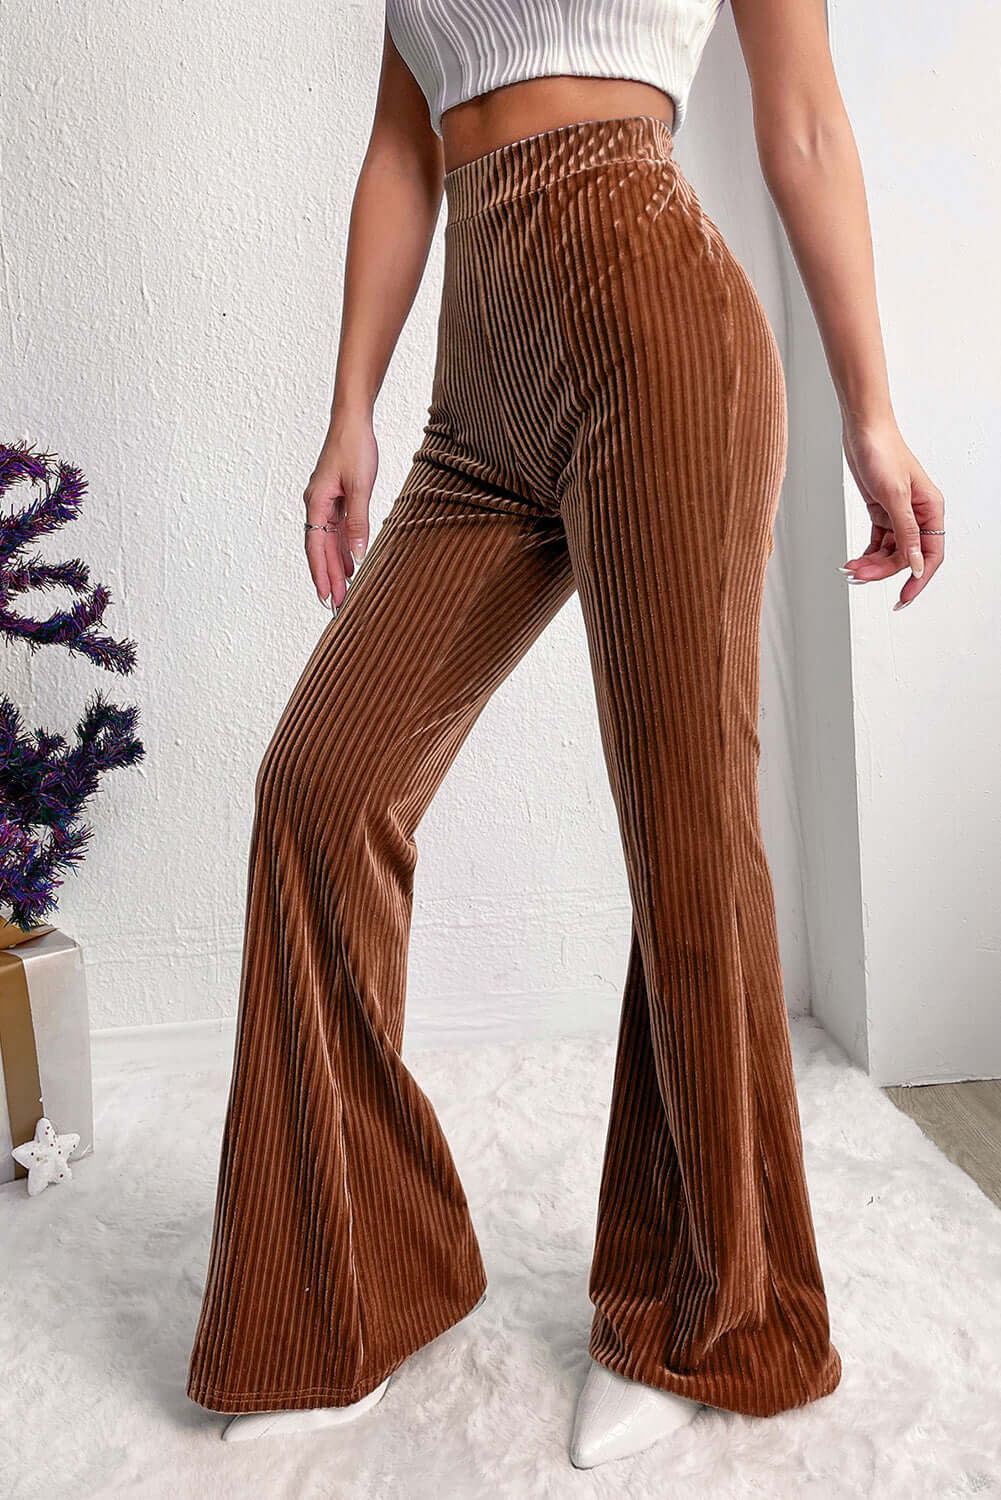 Chestnut Solid Color High Waist Flare Corduroy Pants - Dixie Hike & Style